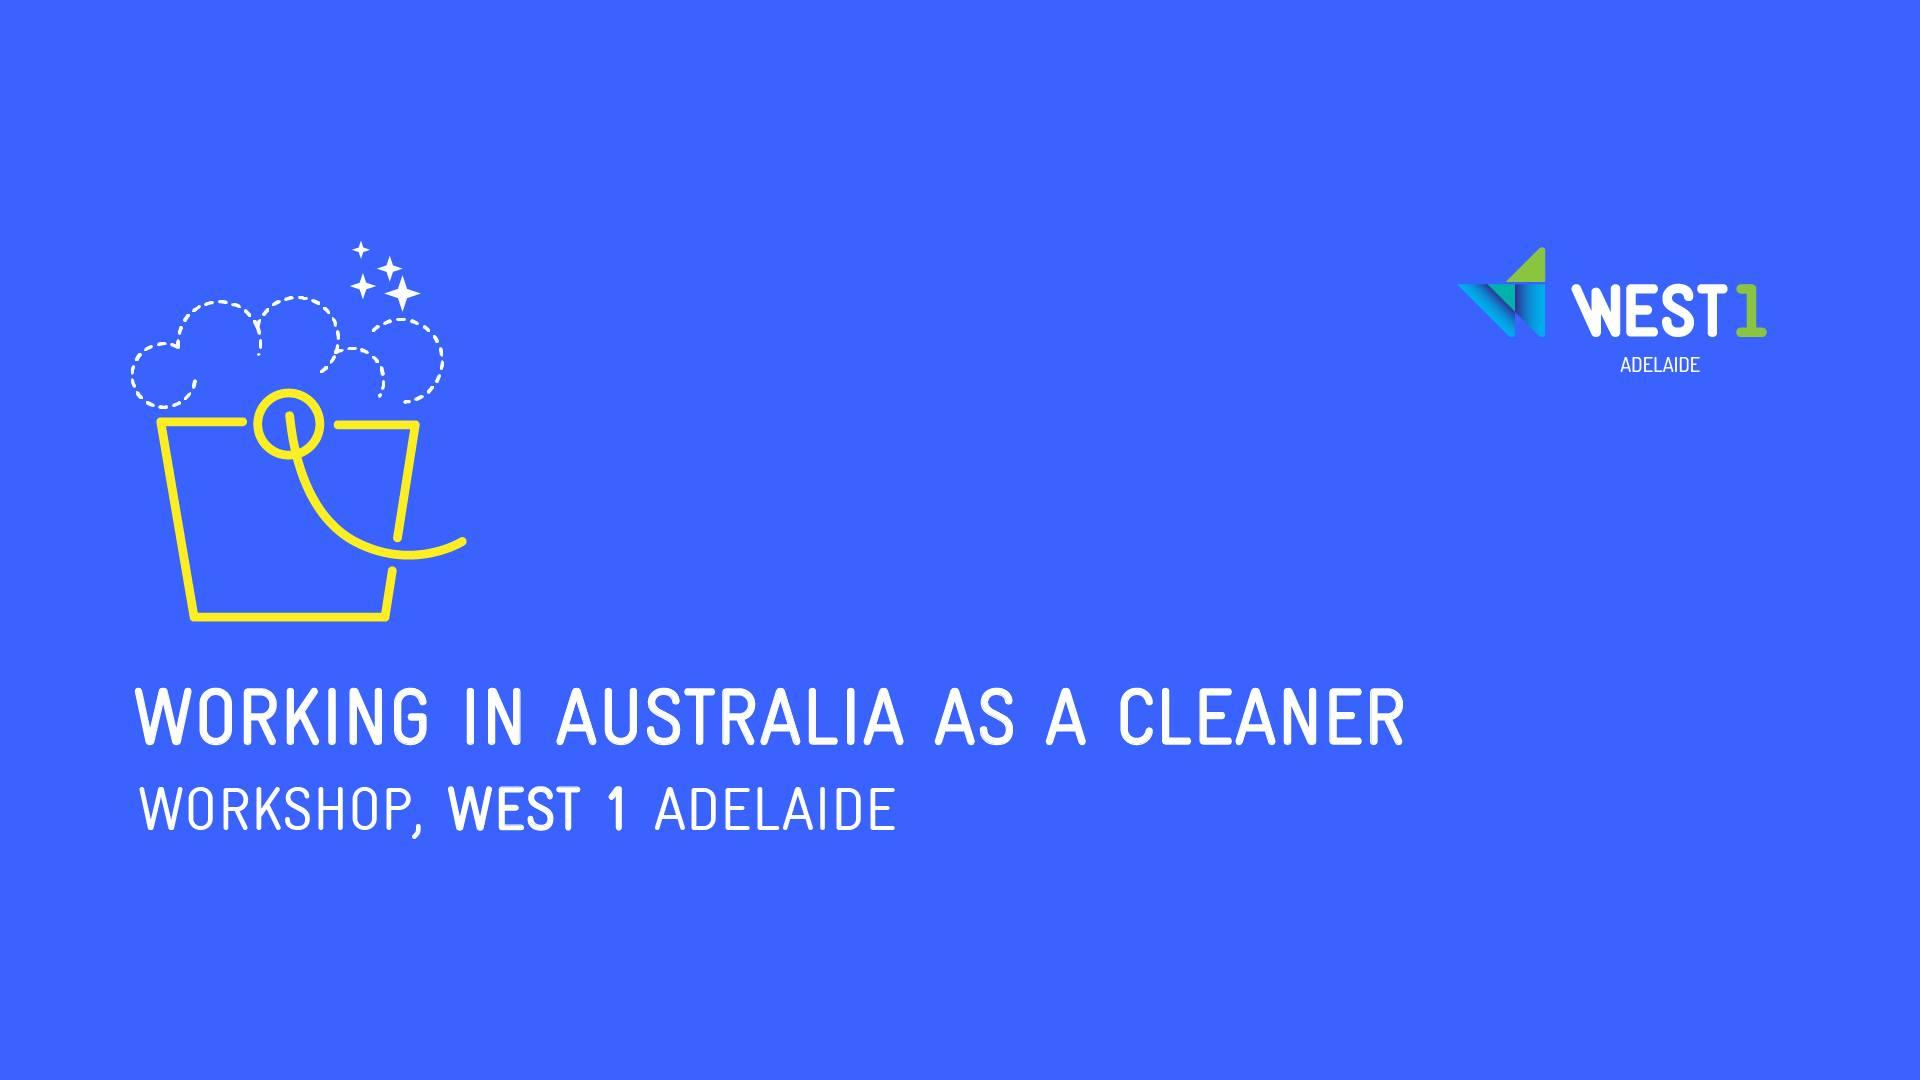 WEST 1 Adelaide | Working in Australia as a Cleaner